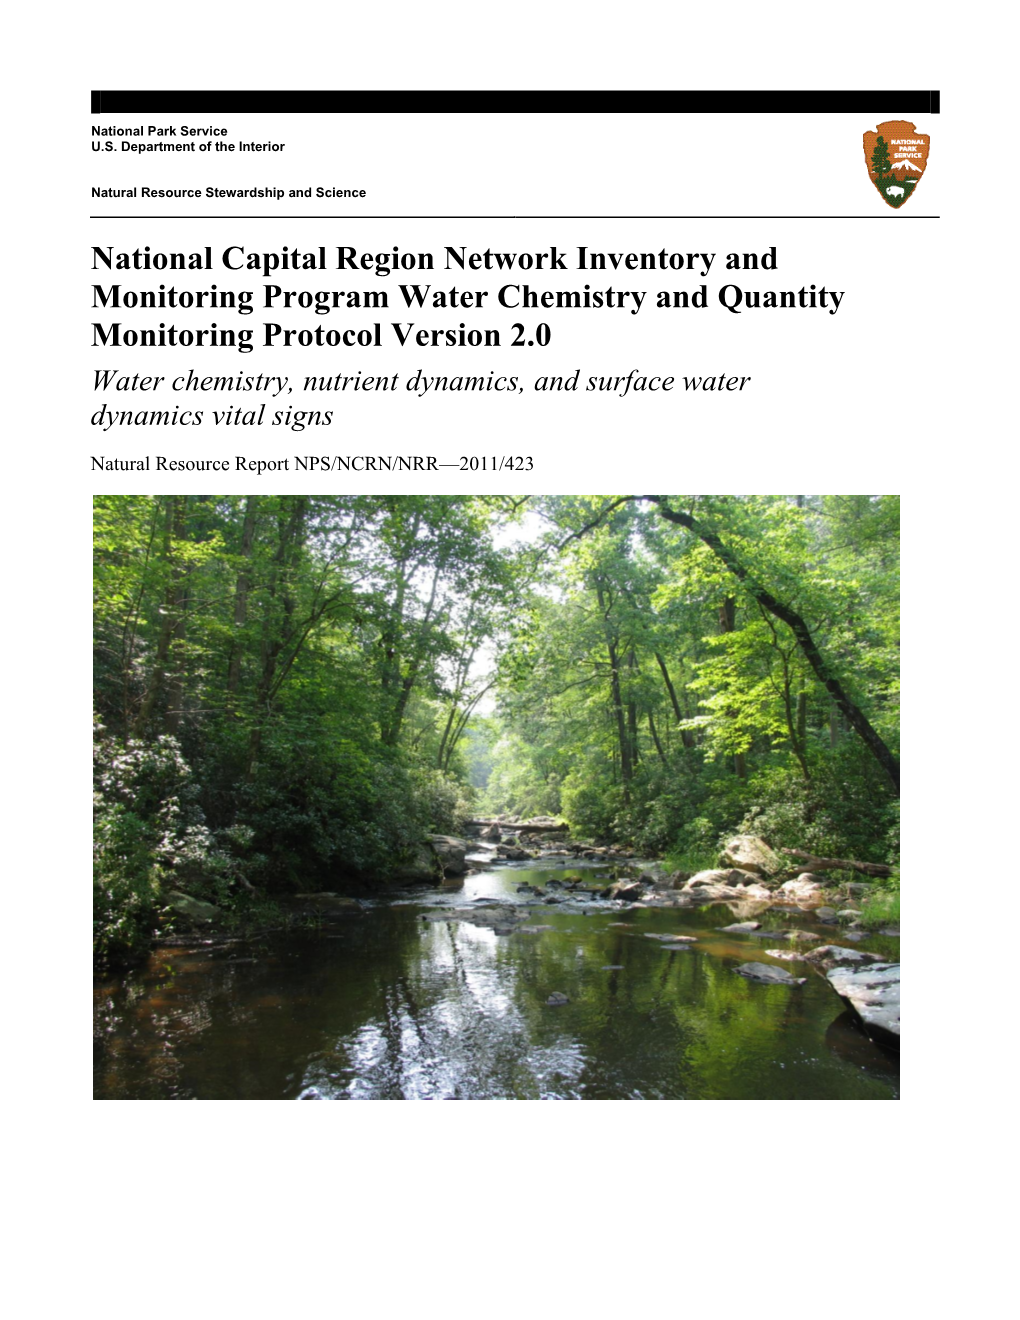 National Capital Region Network Inventory and Monitoring Program